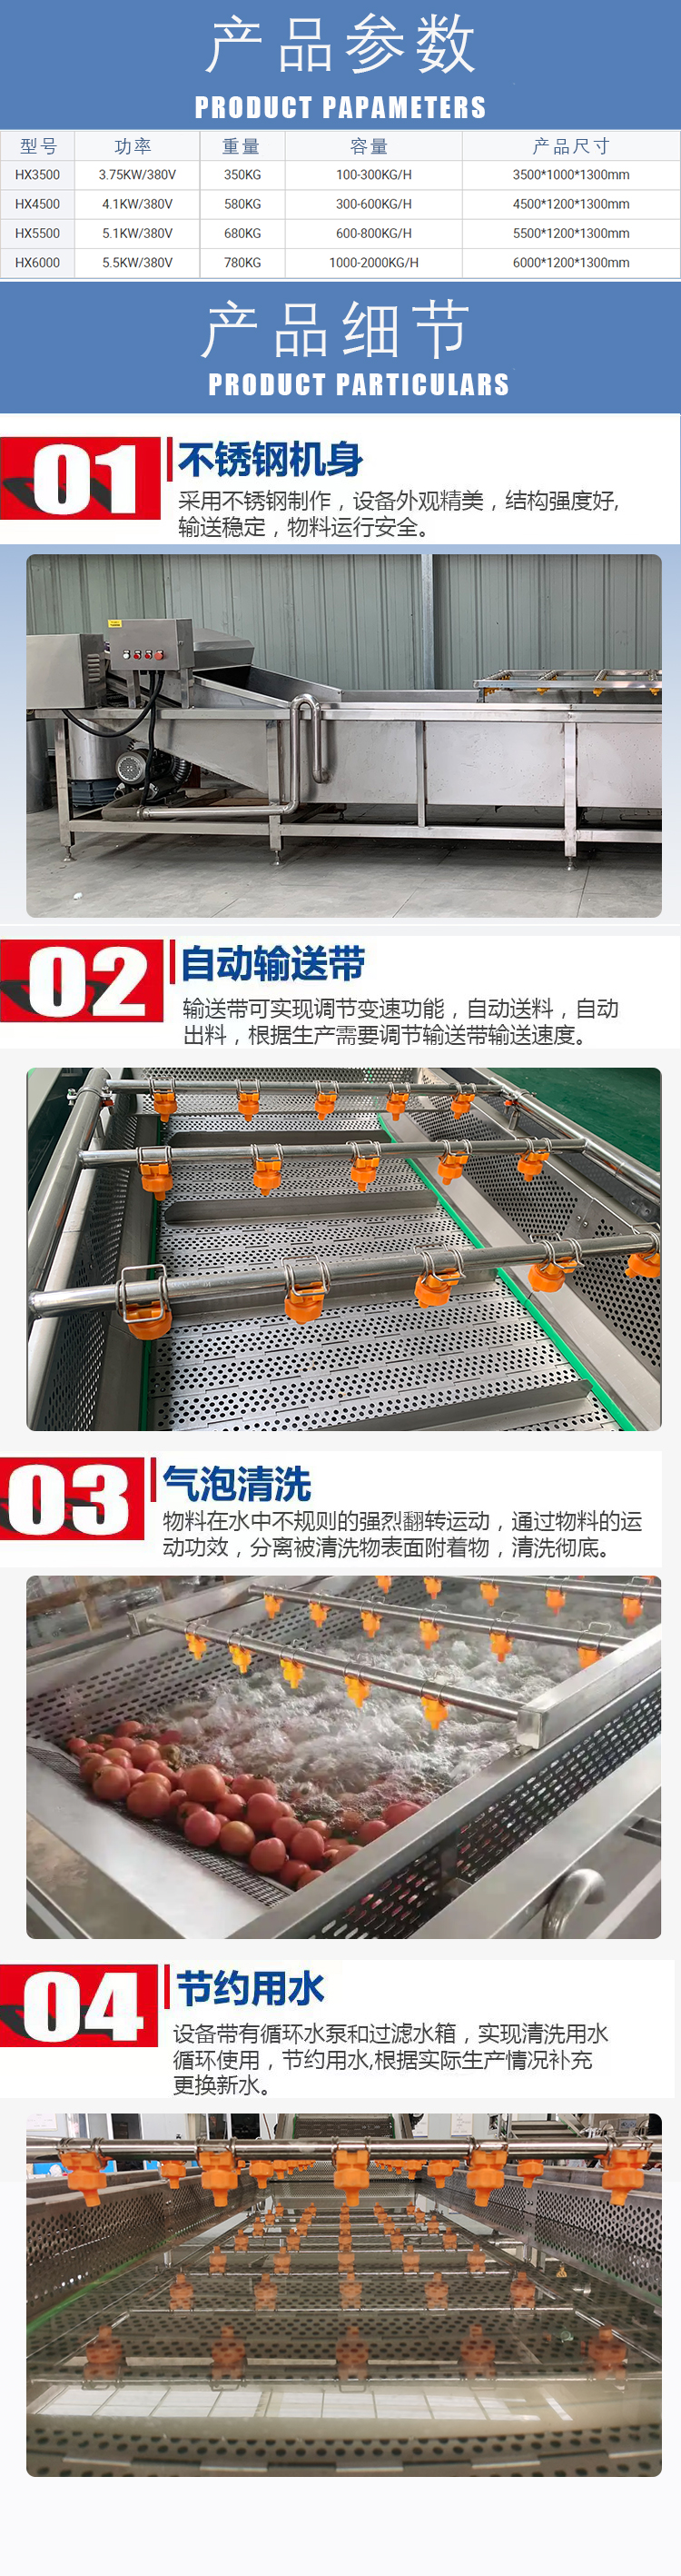 Multifunctional bubble cleaning machine, fungus processing and cleaning equipment, ginger sprout cleaning assembly line, fully automatic control